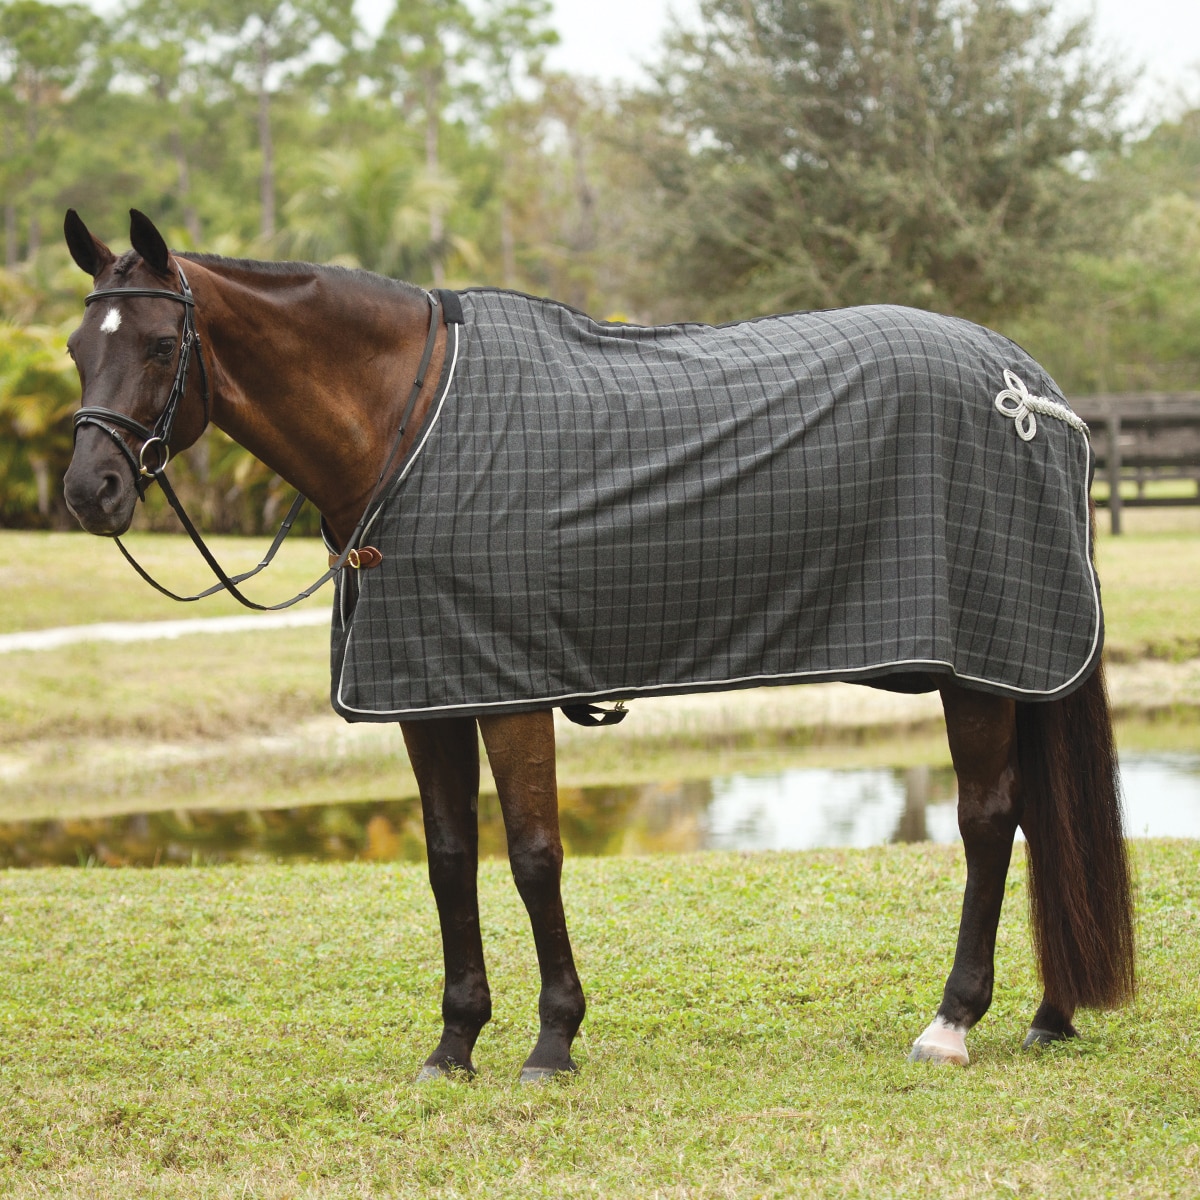 Show Rugs Horse Coolers with Hip Braid Size 63 or 69 Wool Dress Sheets 